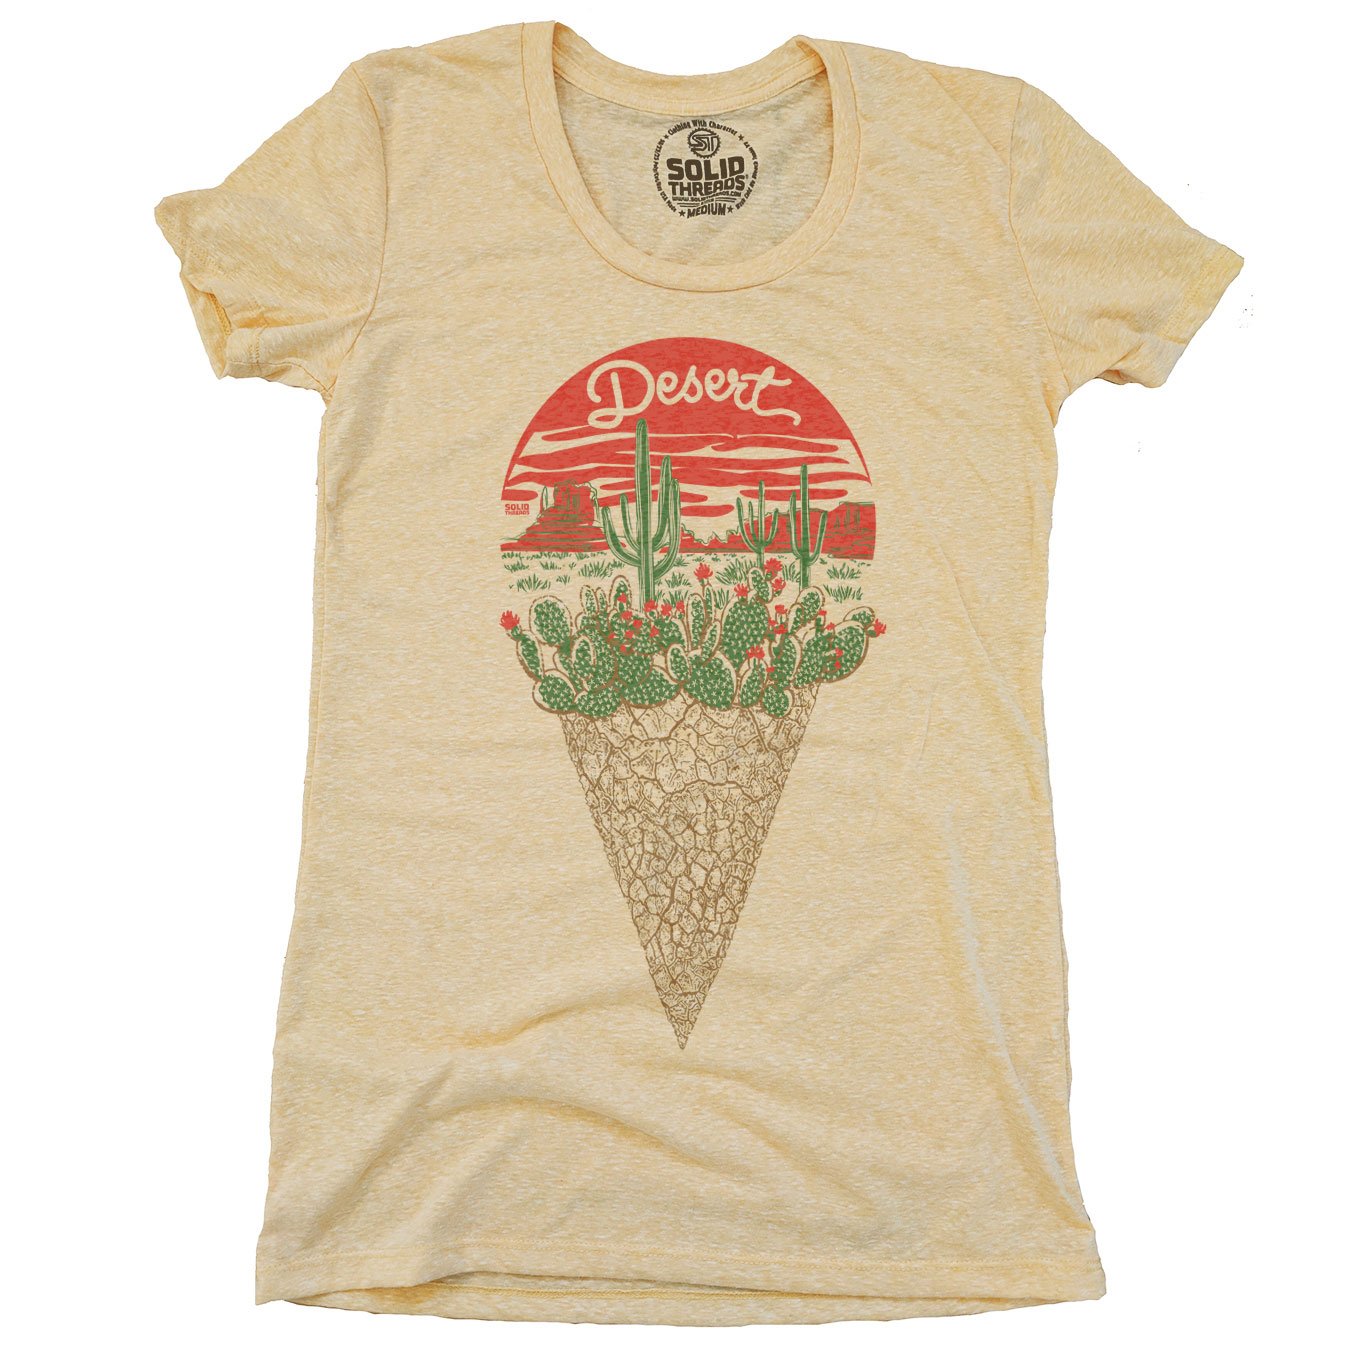 Women's Desert Dessert Cone Funny Graphic T-Shirt | Vintage Food Pun Triblend Tee | Solid Threads